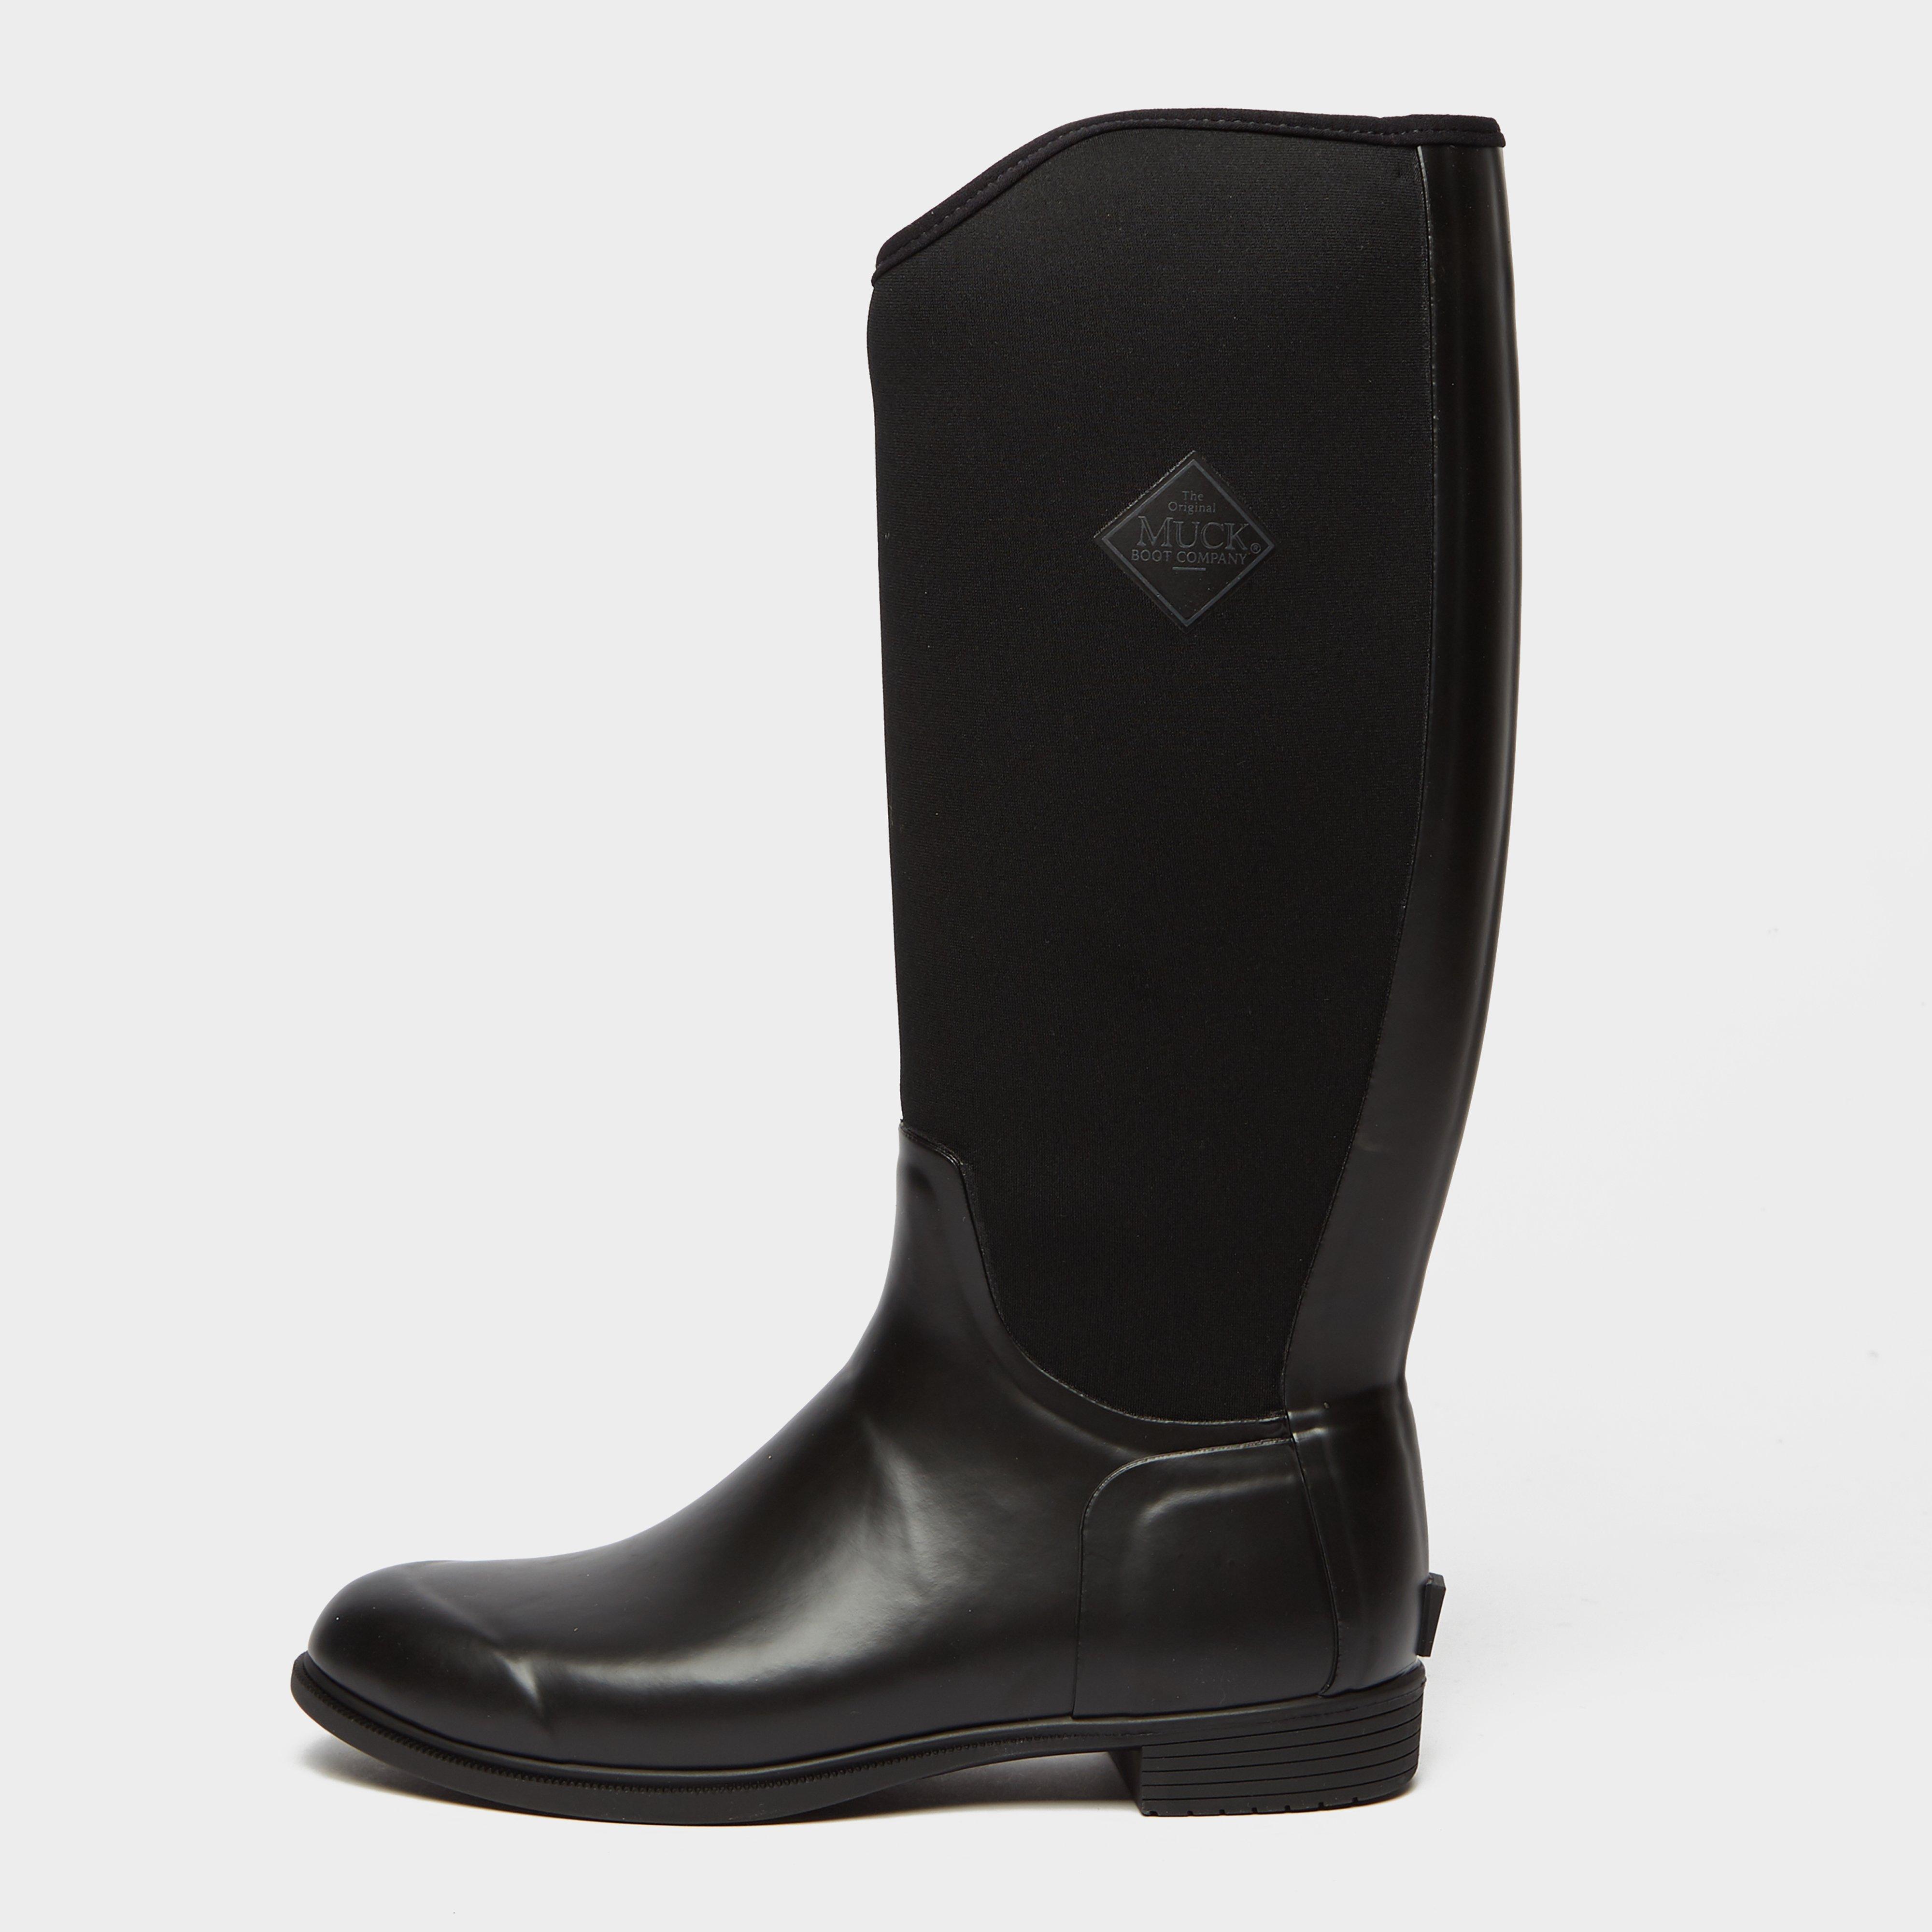  Muck Boot Derby Tall Riding Boots, Black